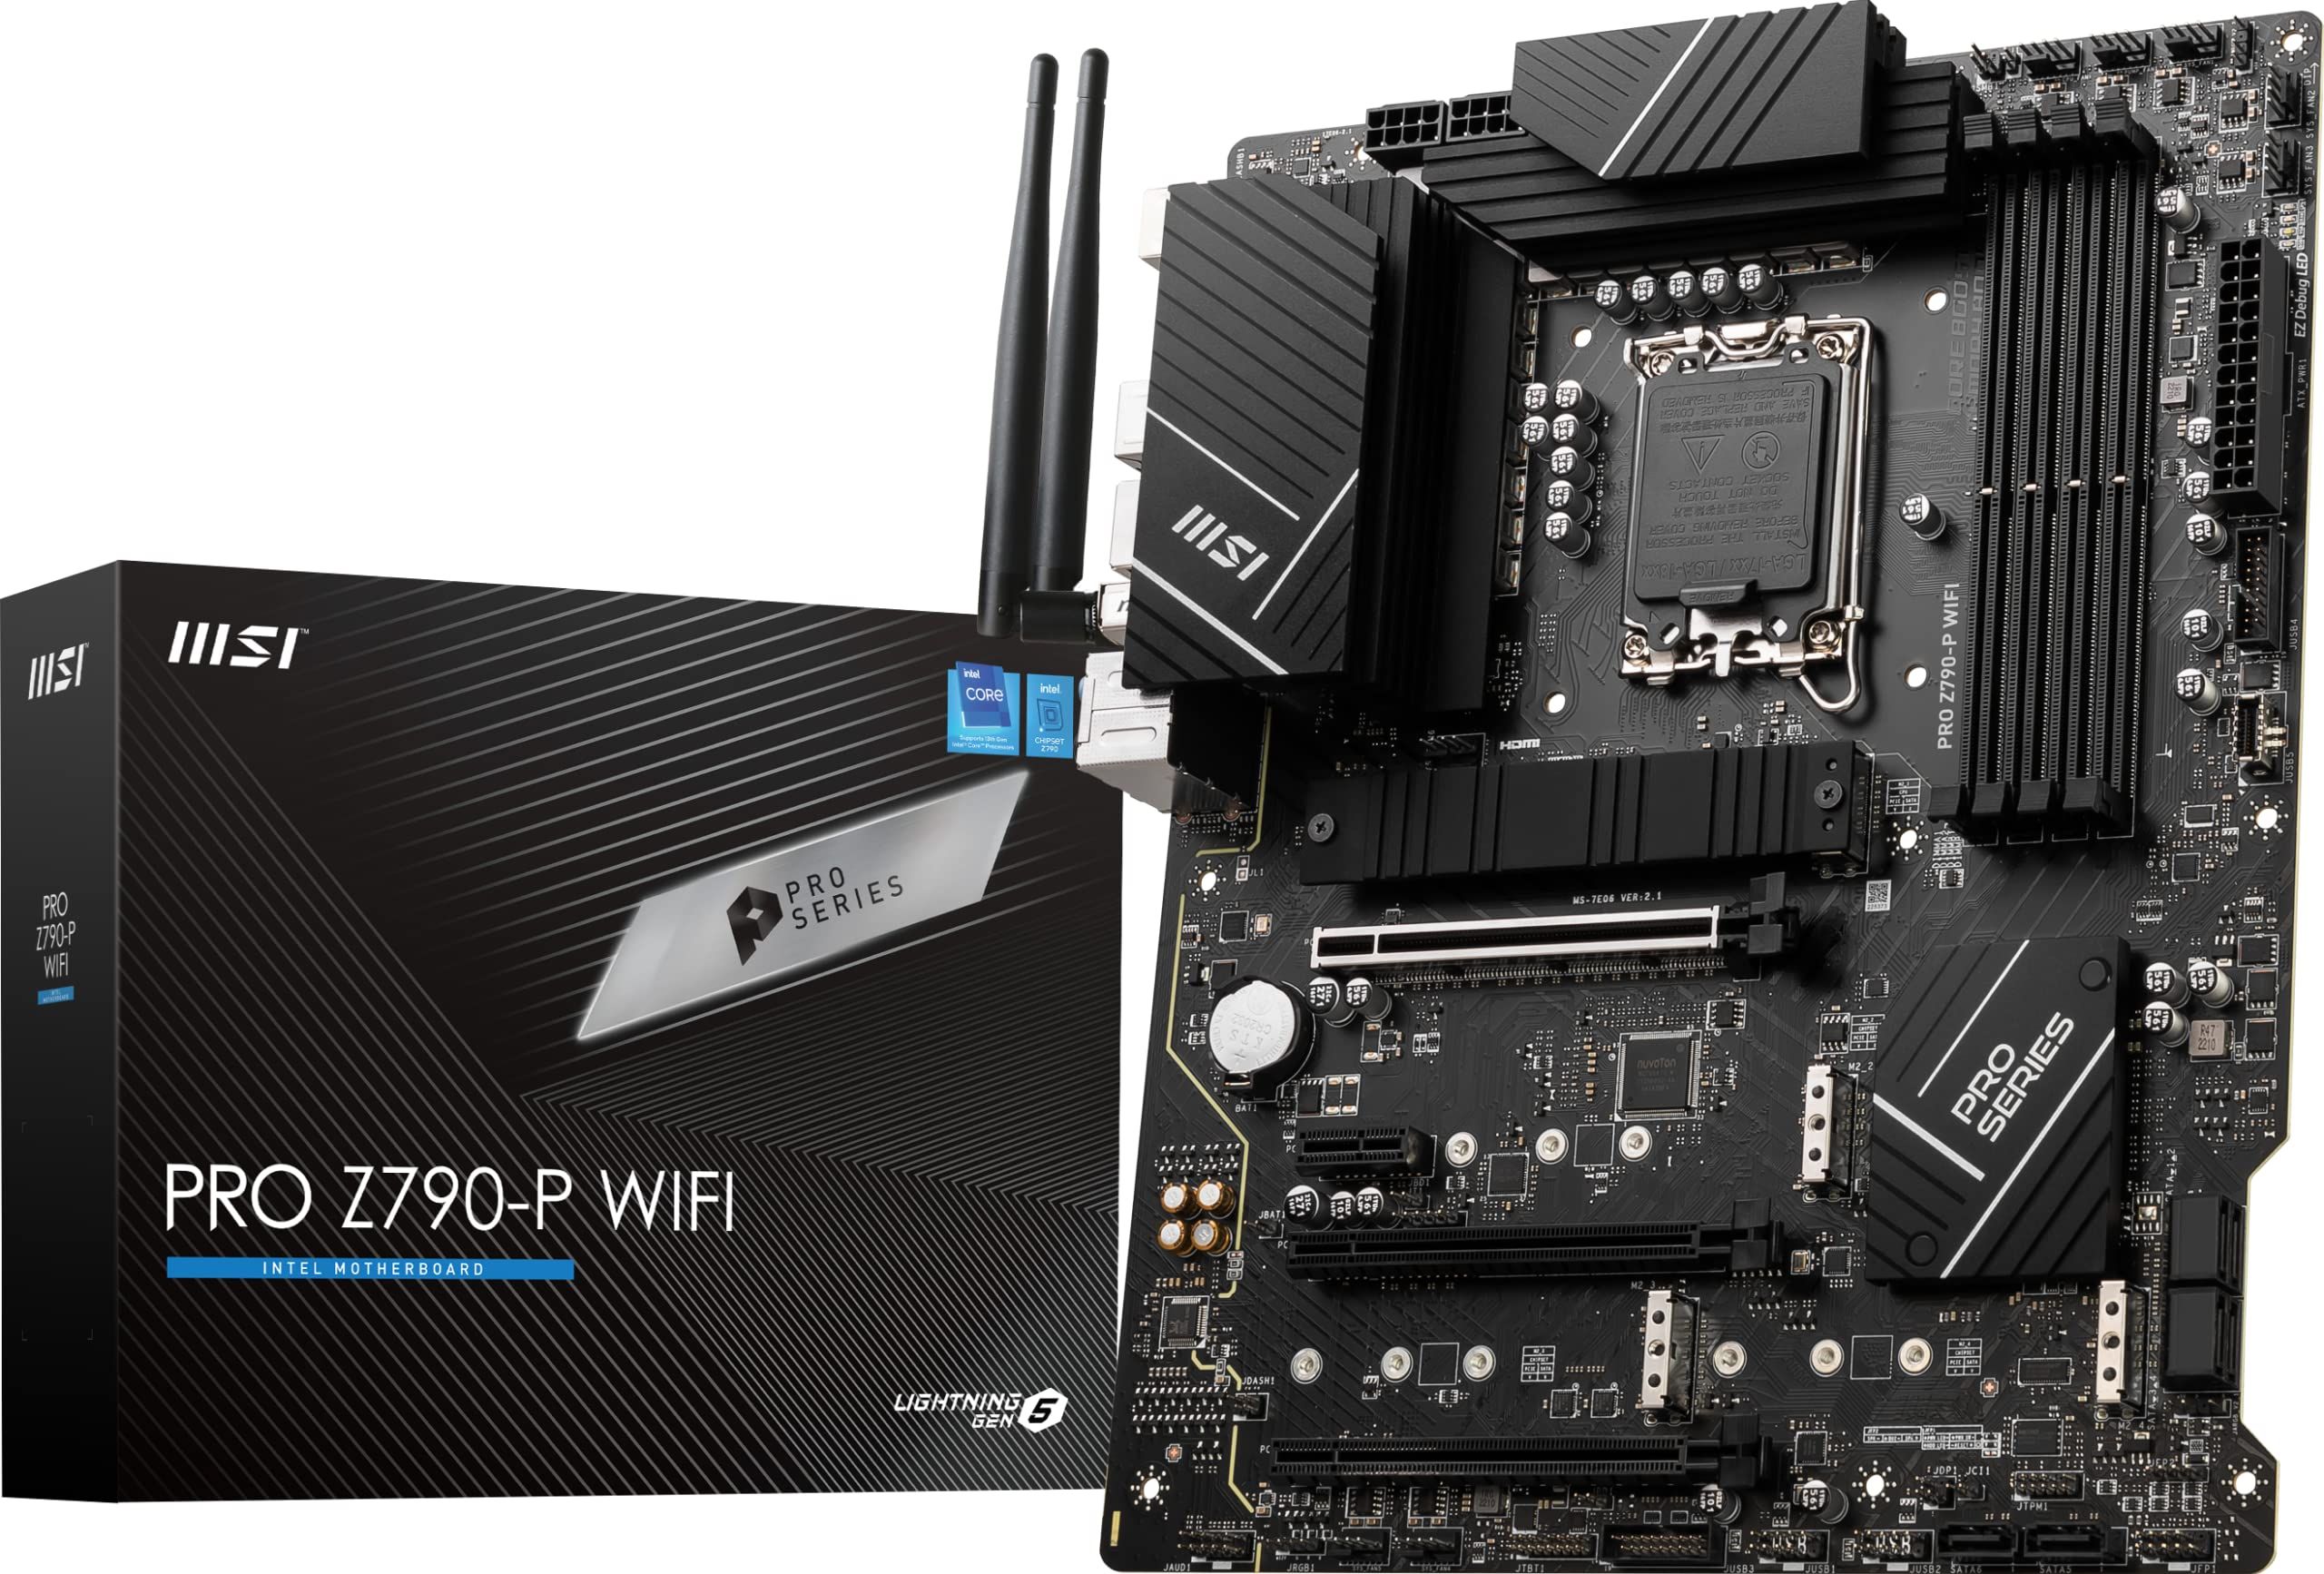 Placa de baza MSI PRO Z790-P LGA 1700 WIFI  SPECIFICATIONS Model Name PRO Z790-P WIFI CPU Support Supports 12th/ 13th Gen Intel® Core™ Processors, Pentium® Gold and Celeron® Processors CPU Socket LGA 1700 Chipset Intel® Z790 Chipset Expansion Slots 1x PCIe 5.0 x16 slot 1x PCIe 4.0 x16 slot 2x PCIe_2